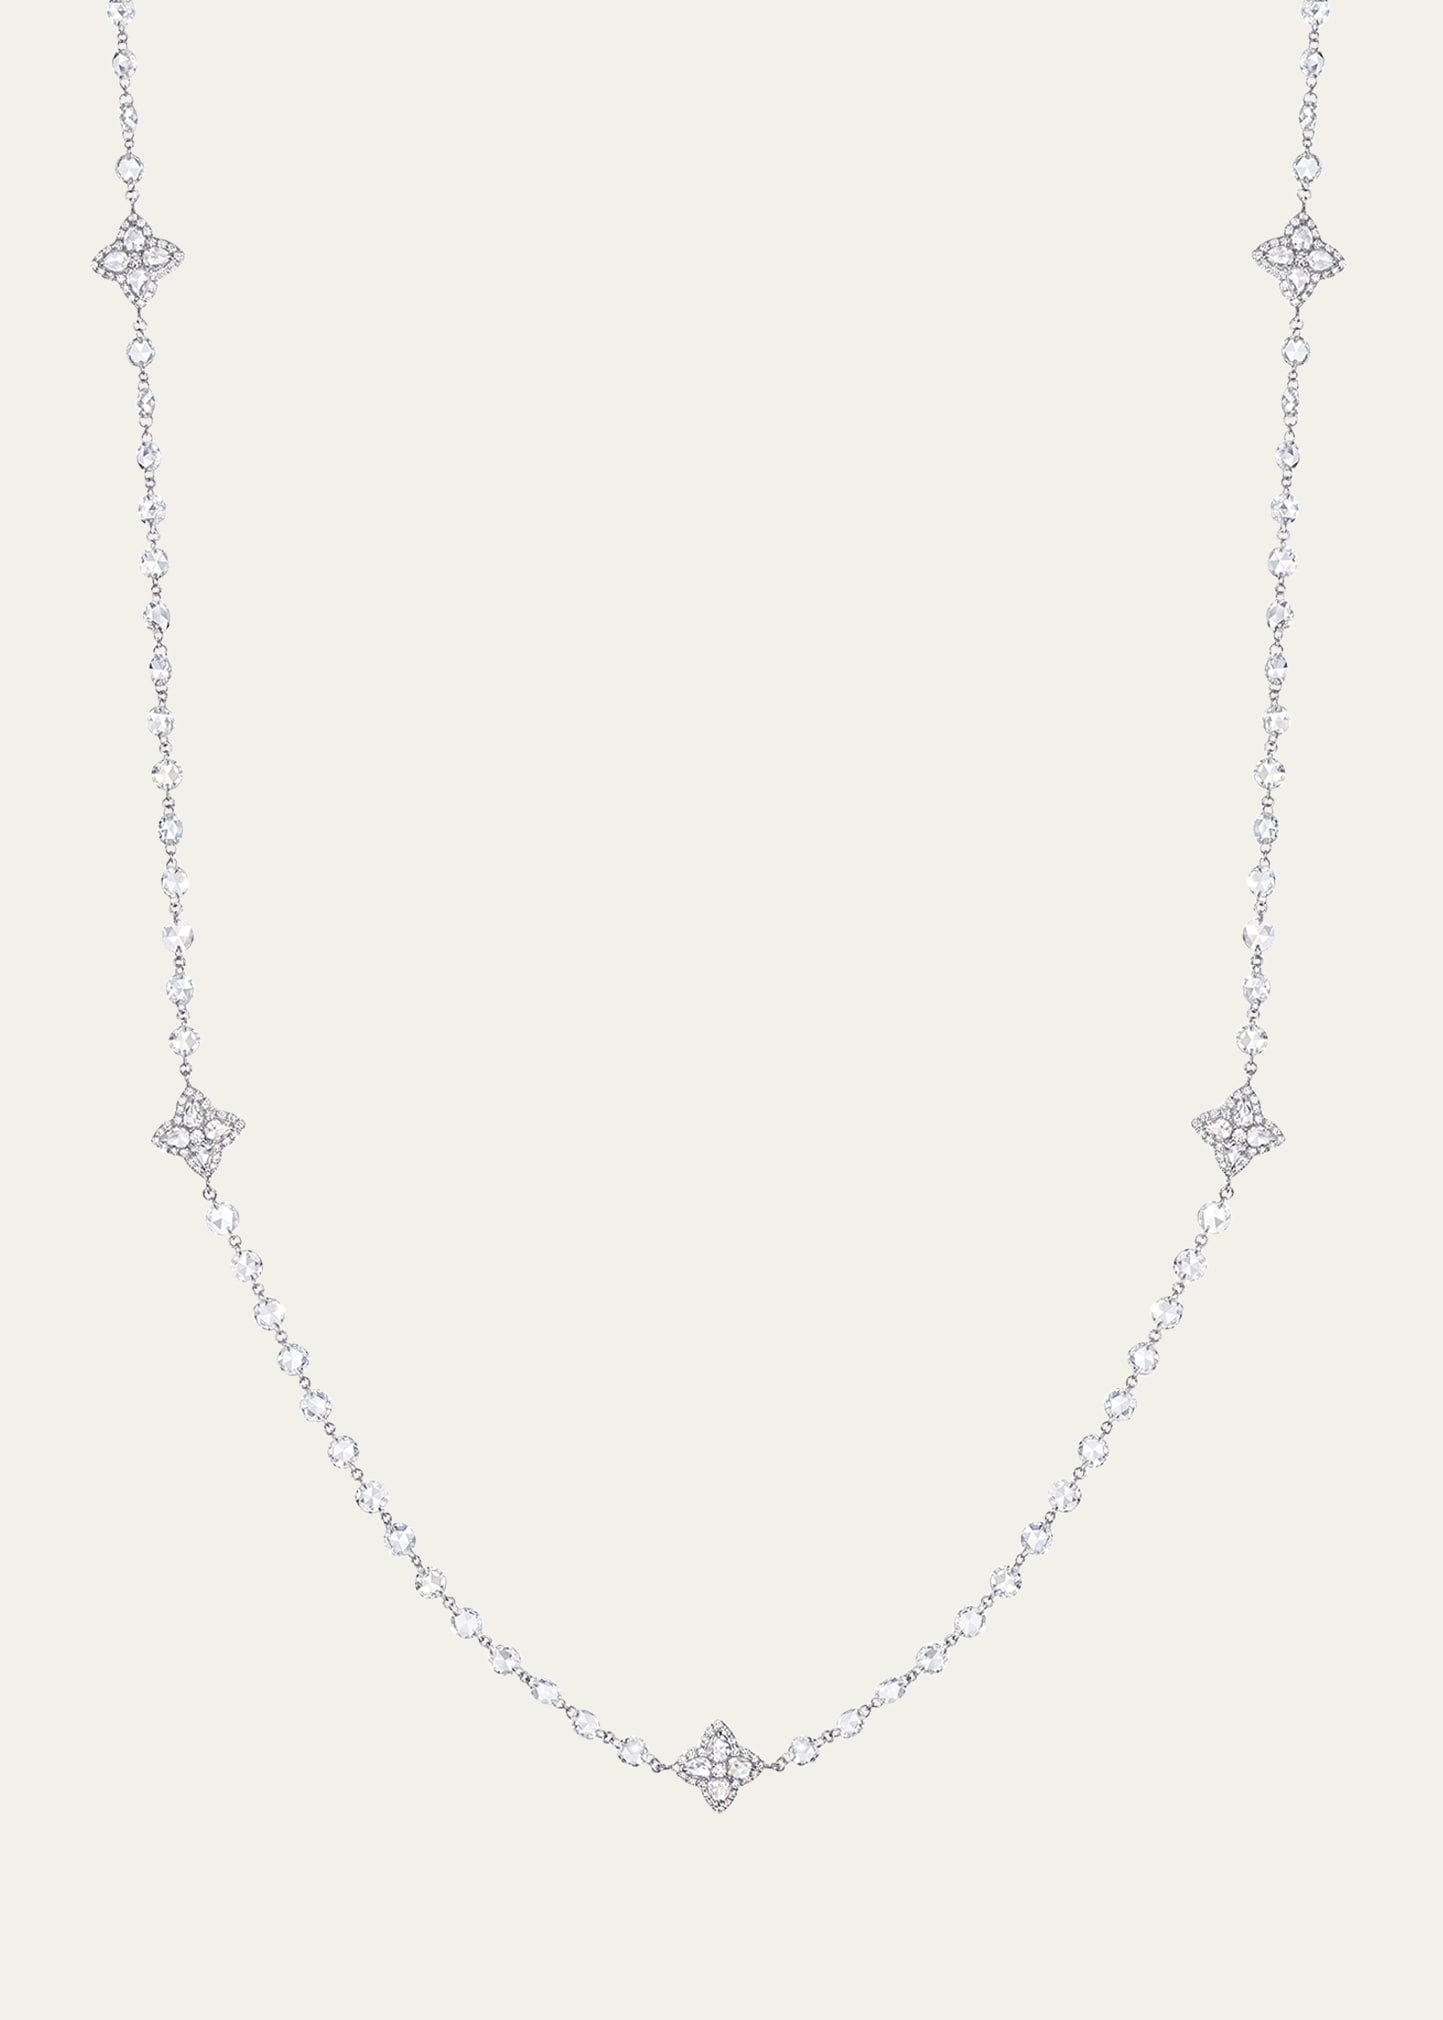 18K White Gold Necklace with Blossom Diamond Stations, 32"L